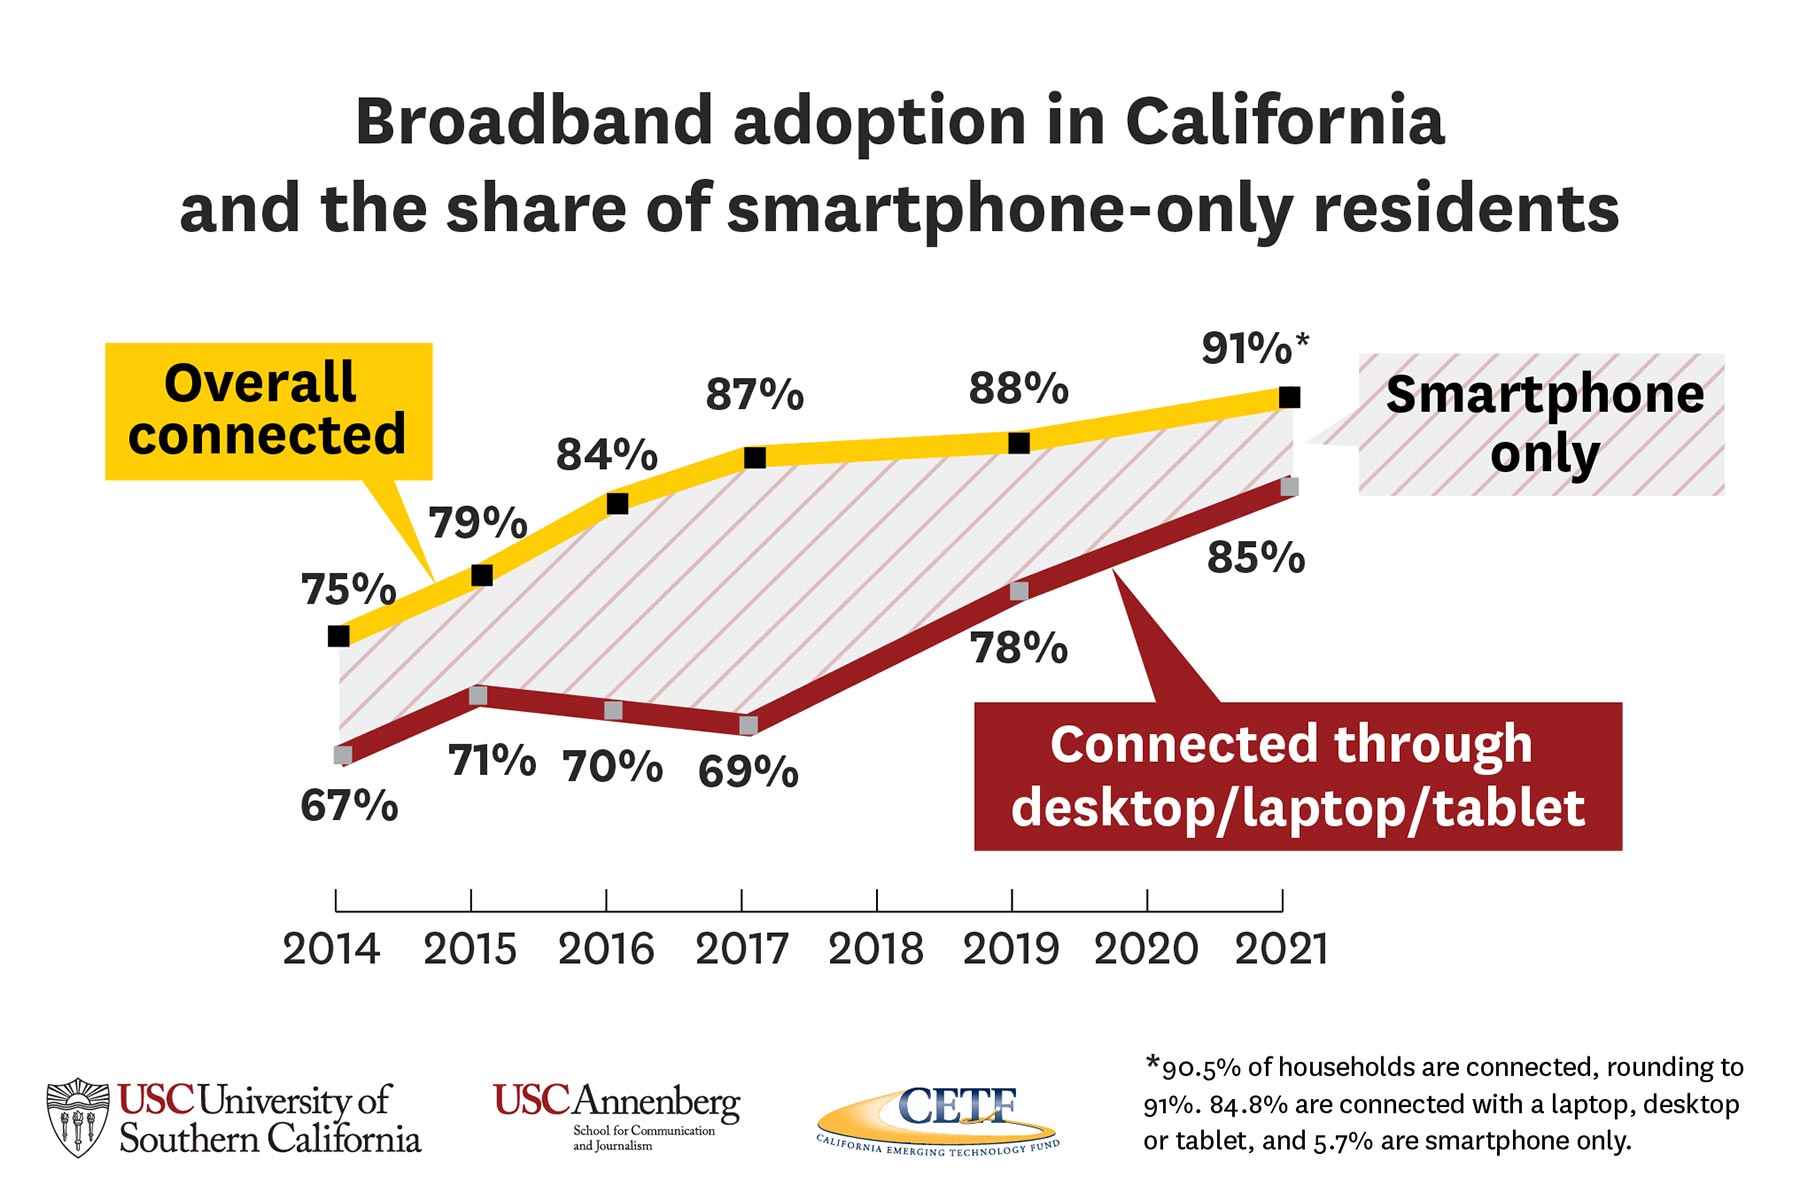 Broadband adoption in California and the share of smartphone-only residents